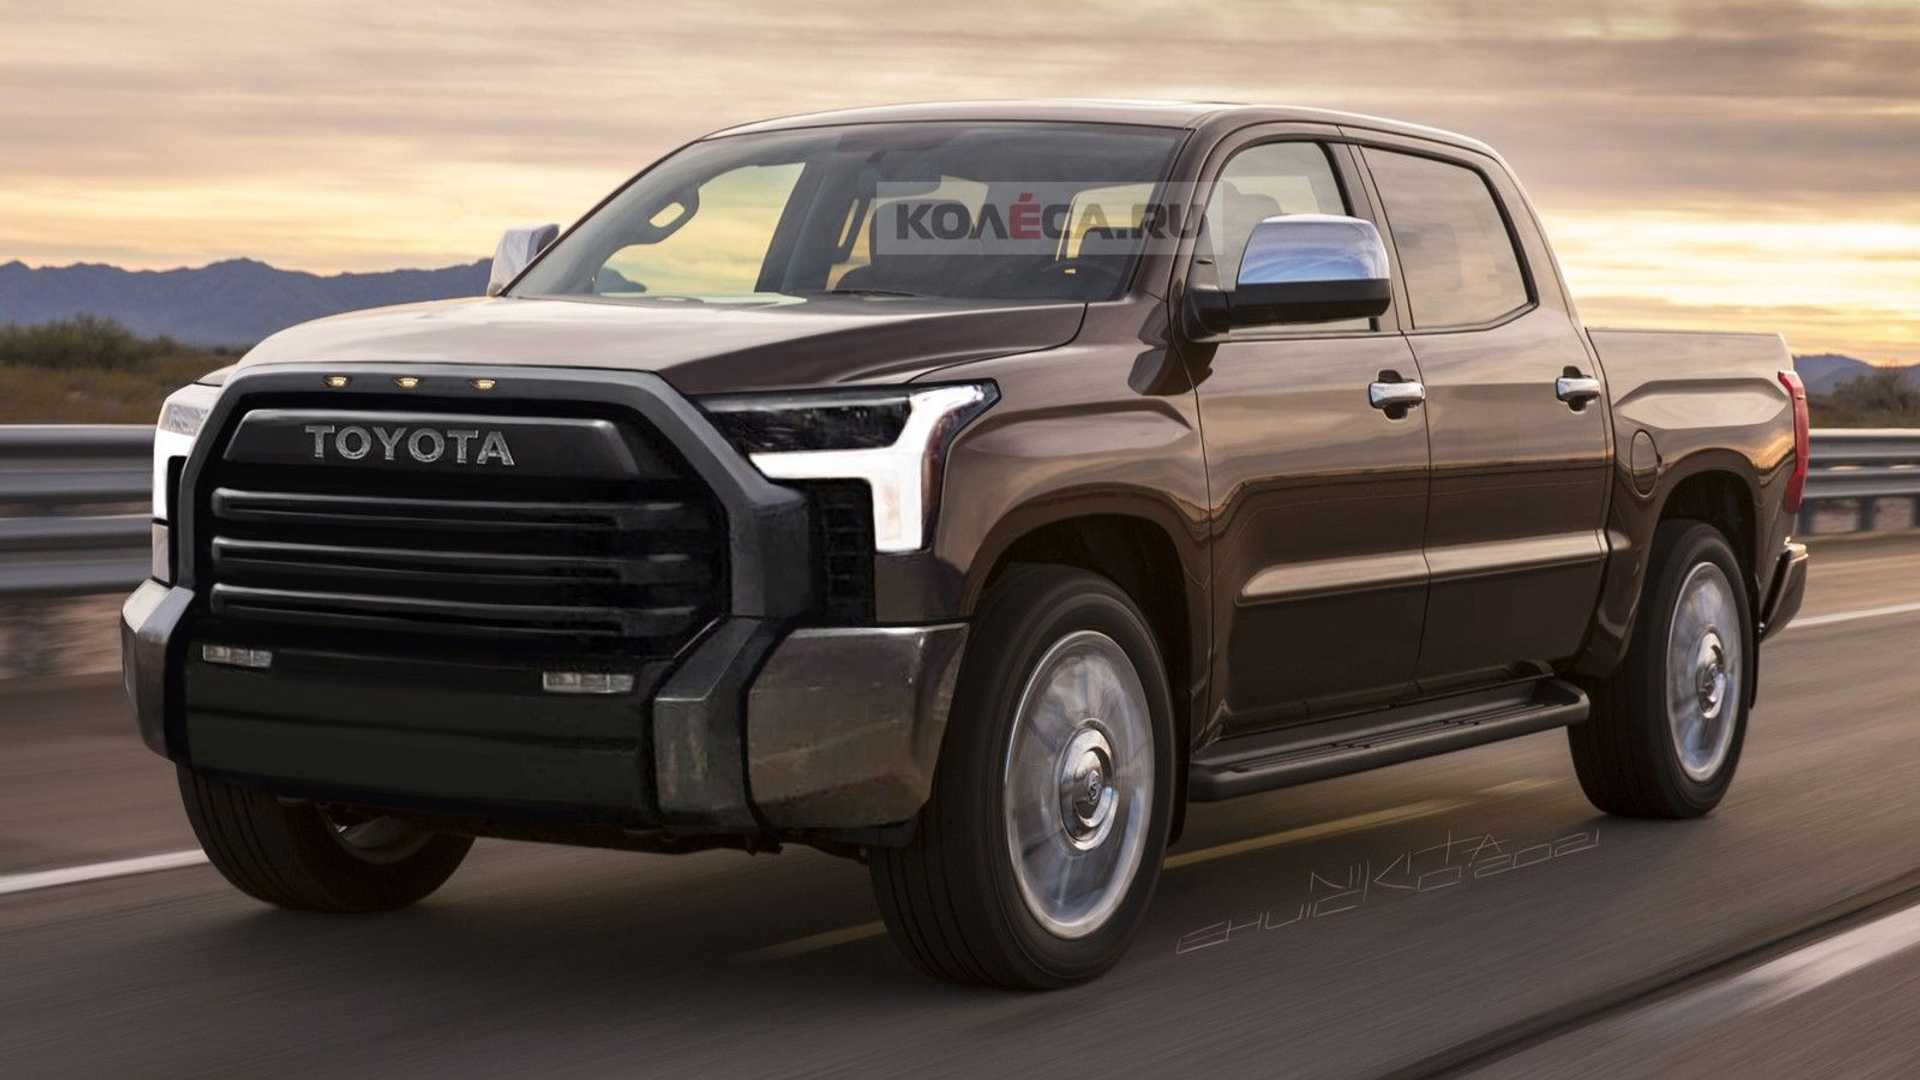 2022 Toyota Tundra Rendering Attempts To Peel Off The ...